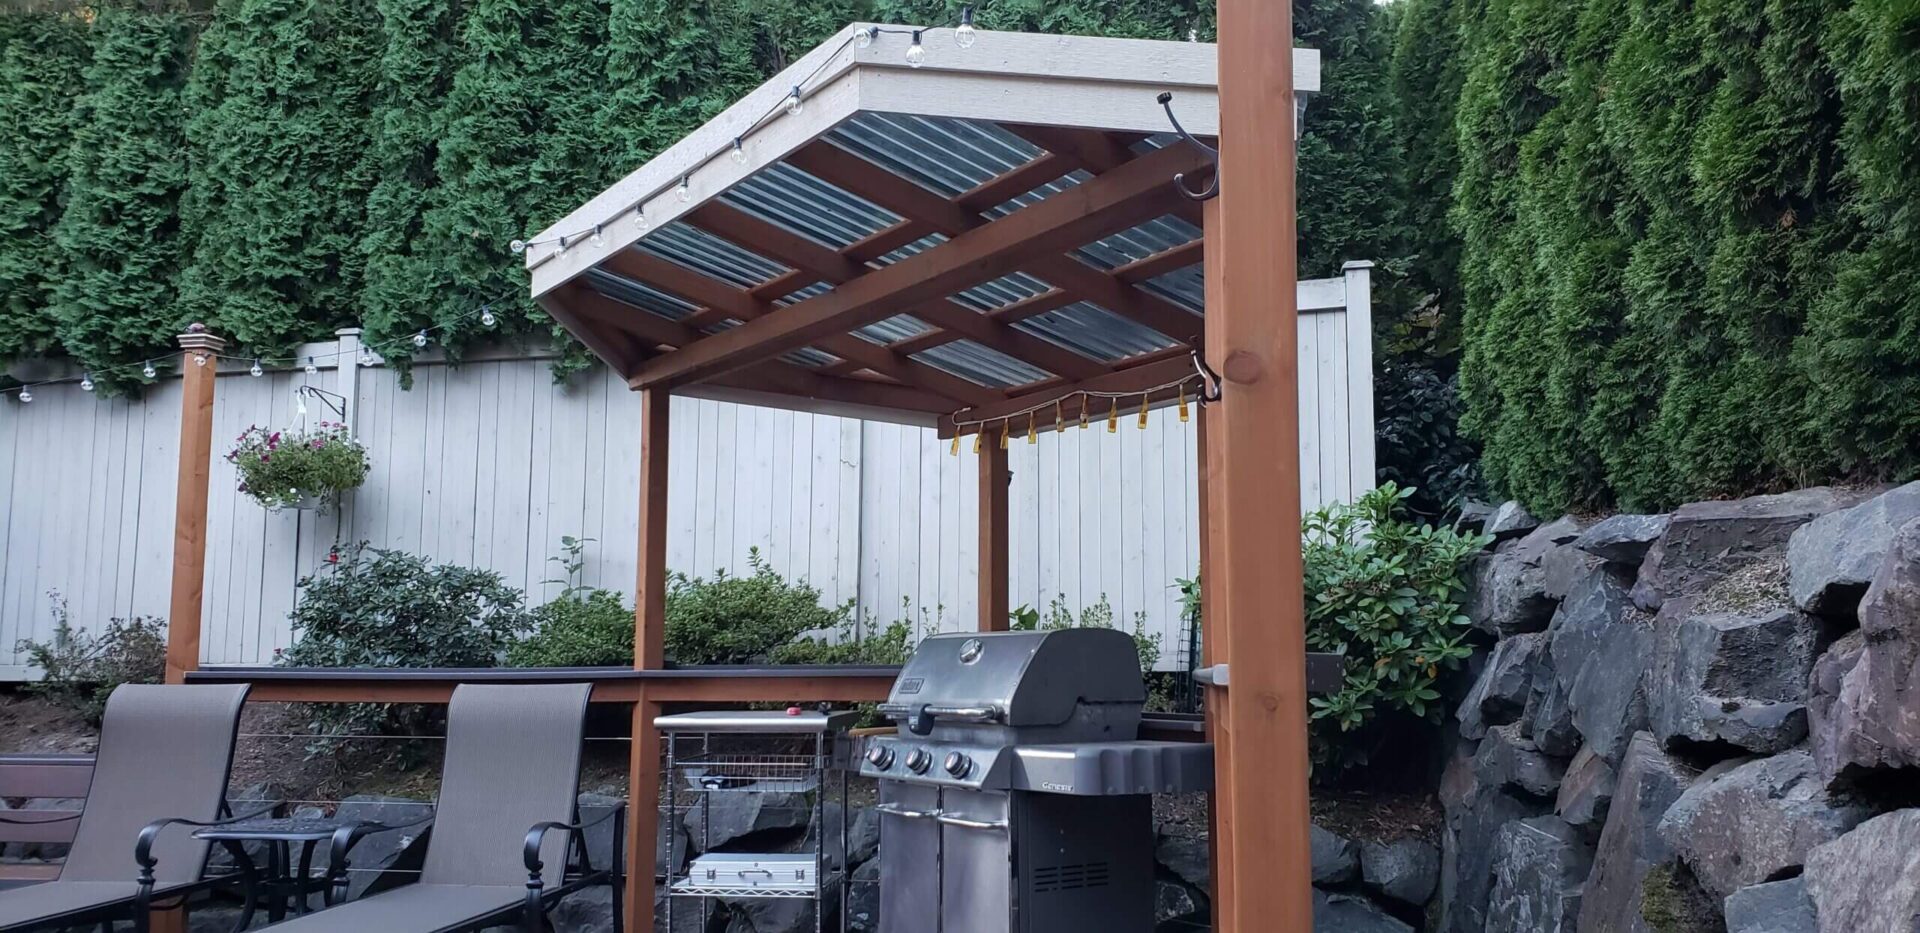 An outdoor patio with grills and barbecue